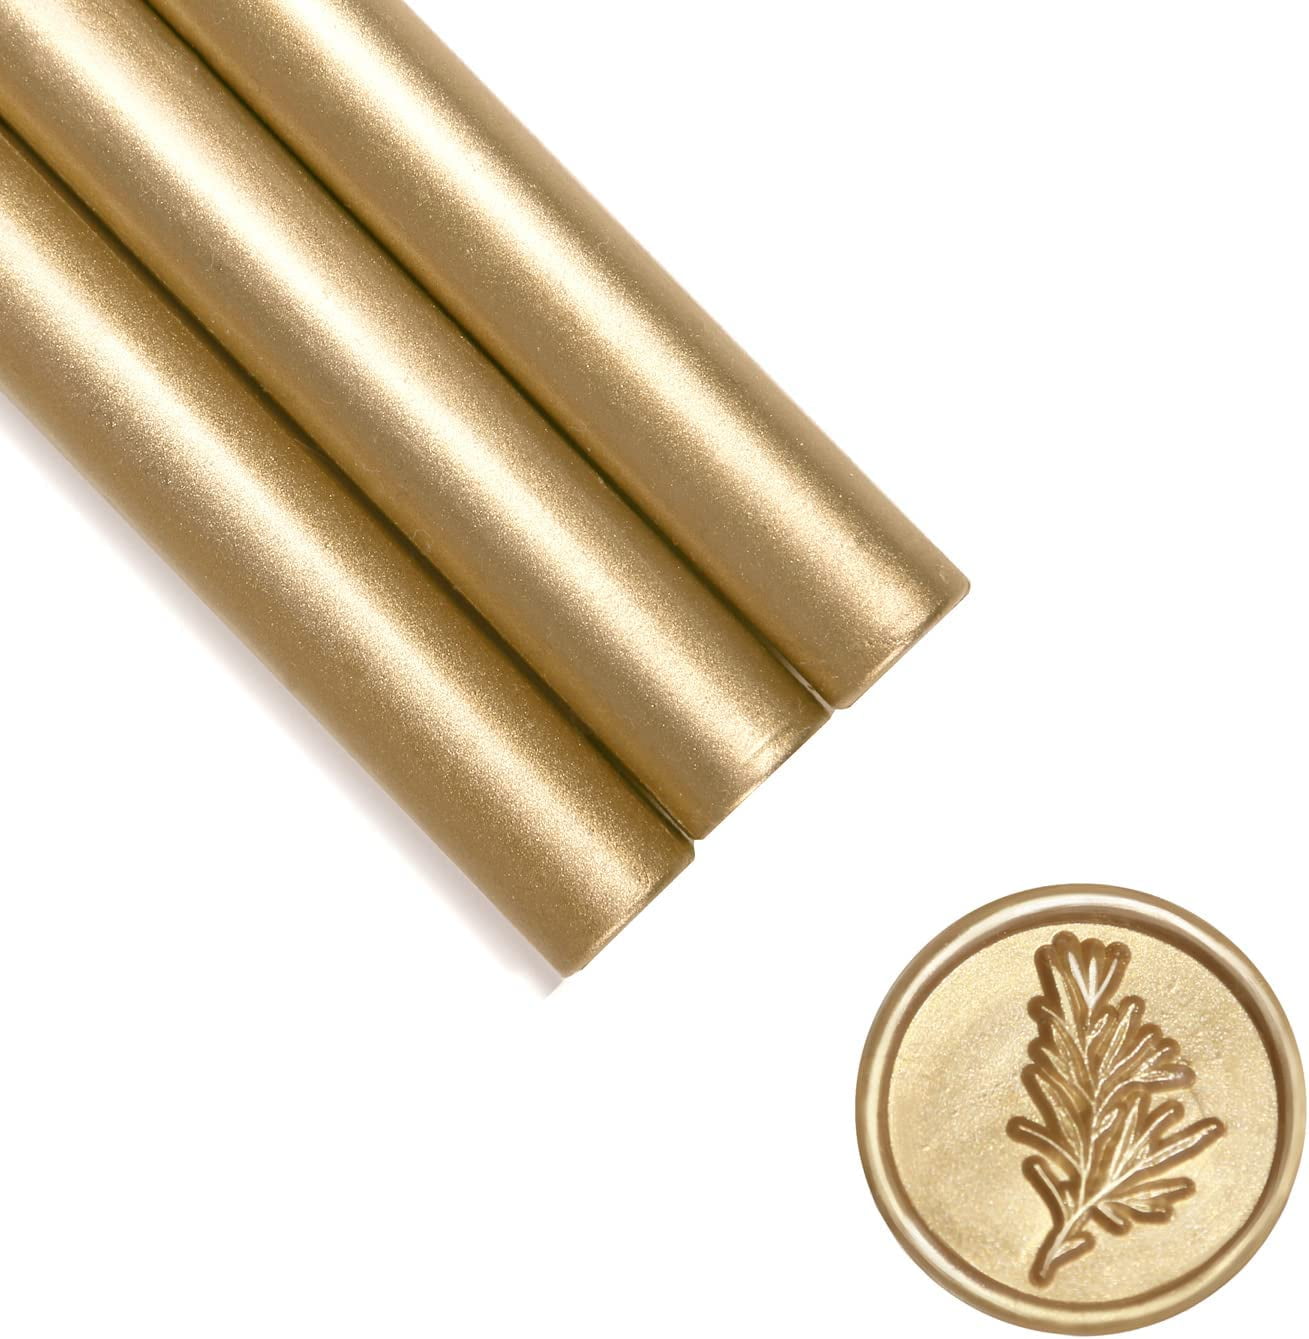 UNIQOOO Glue Gun Sealing Wax Sticks for Wax Seal Stamp - Prosecco Metallic  Light Gold, Great for Wedding Invitation, Card Envelope, Snail Mail, Wine  Package, Christmas Gift Ideas, Pack of 8 